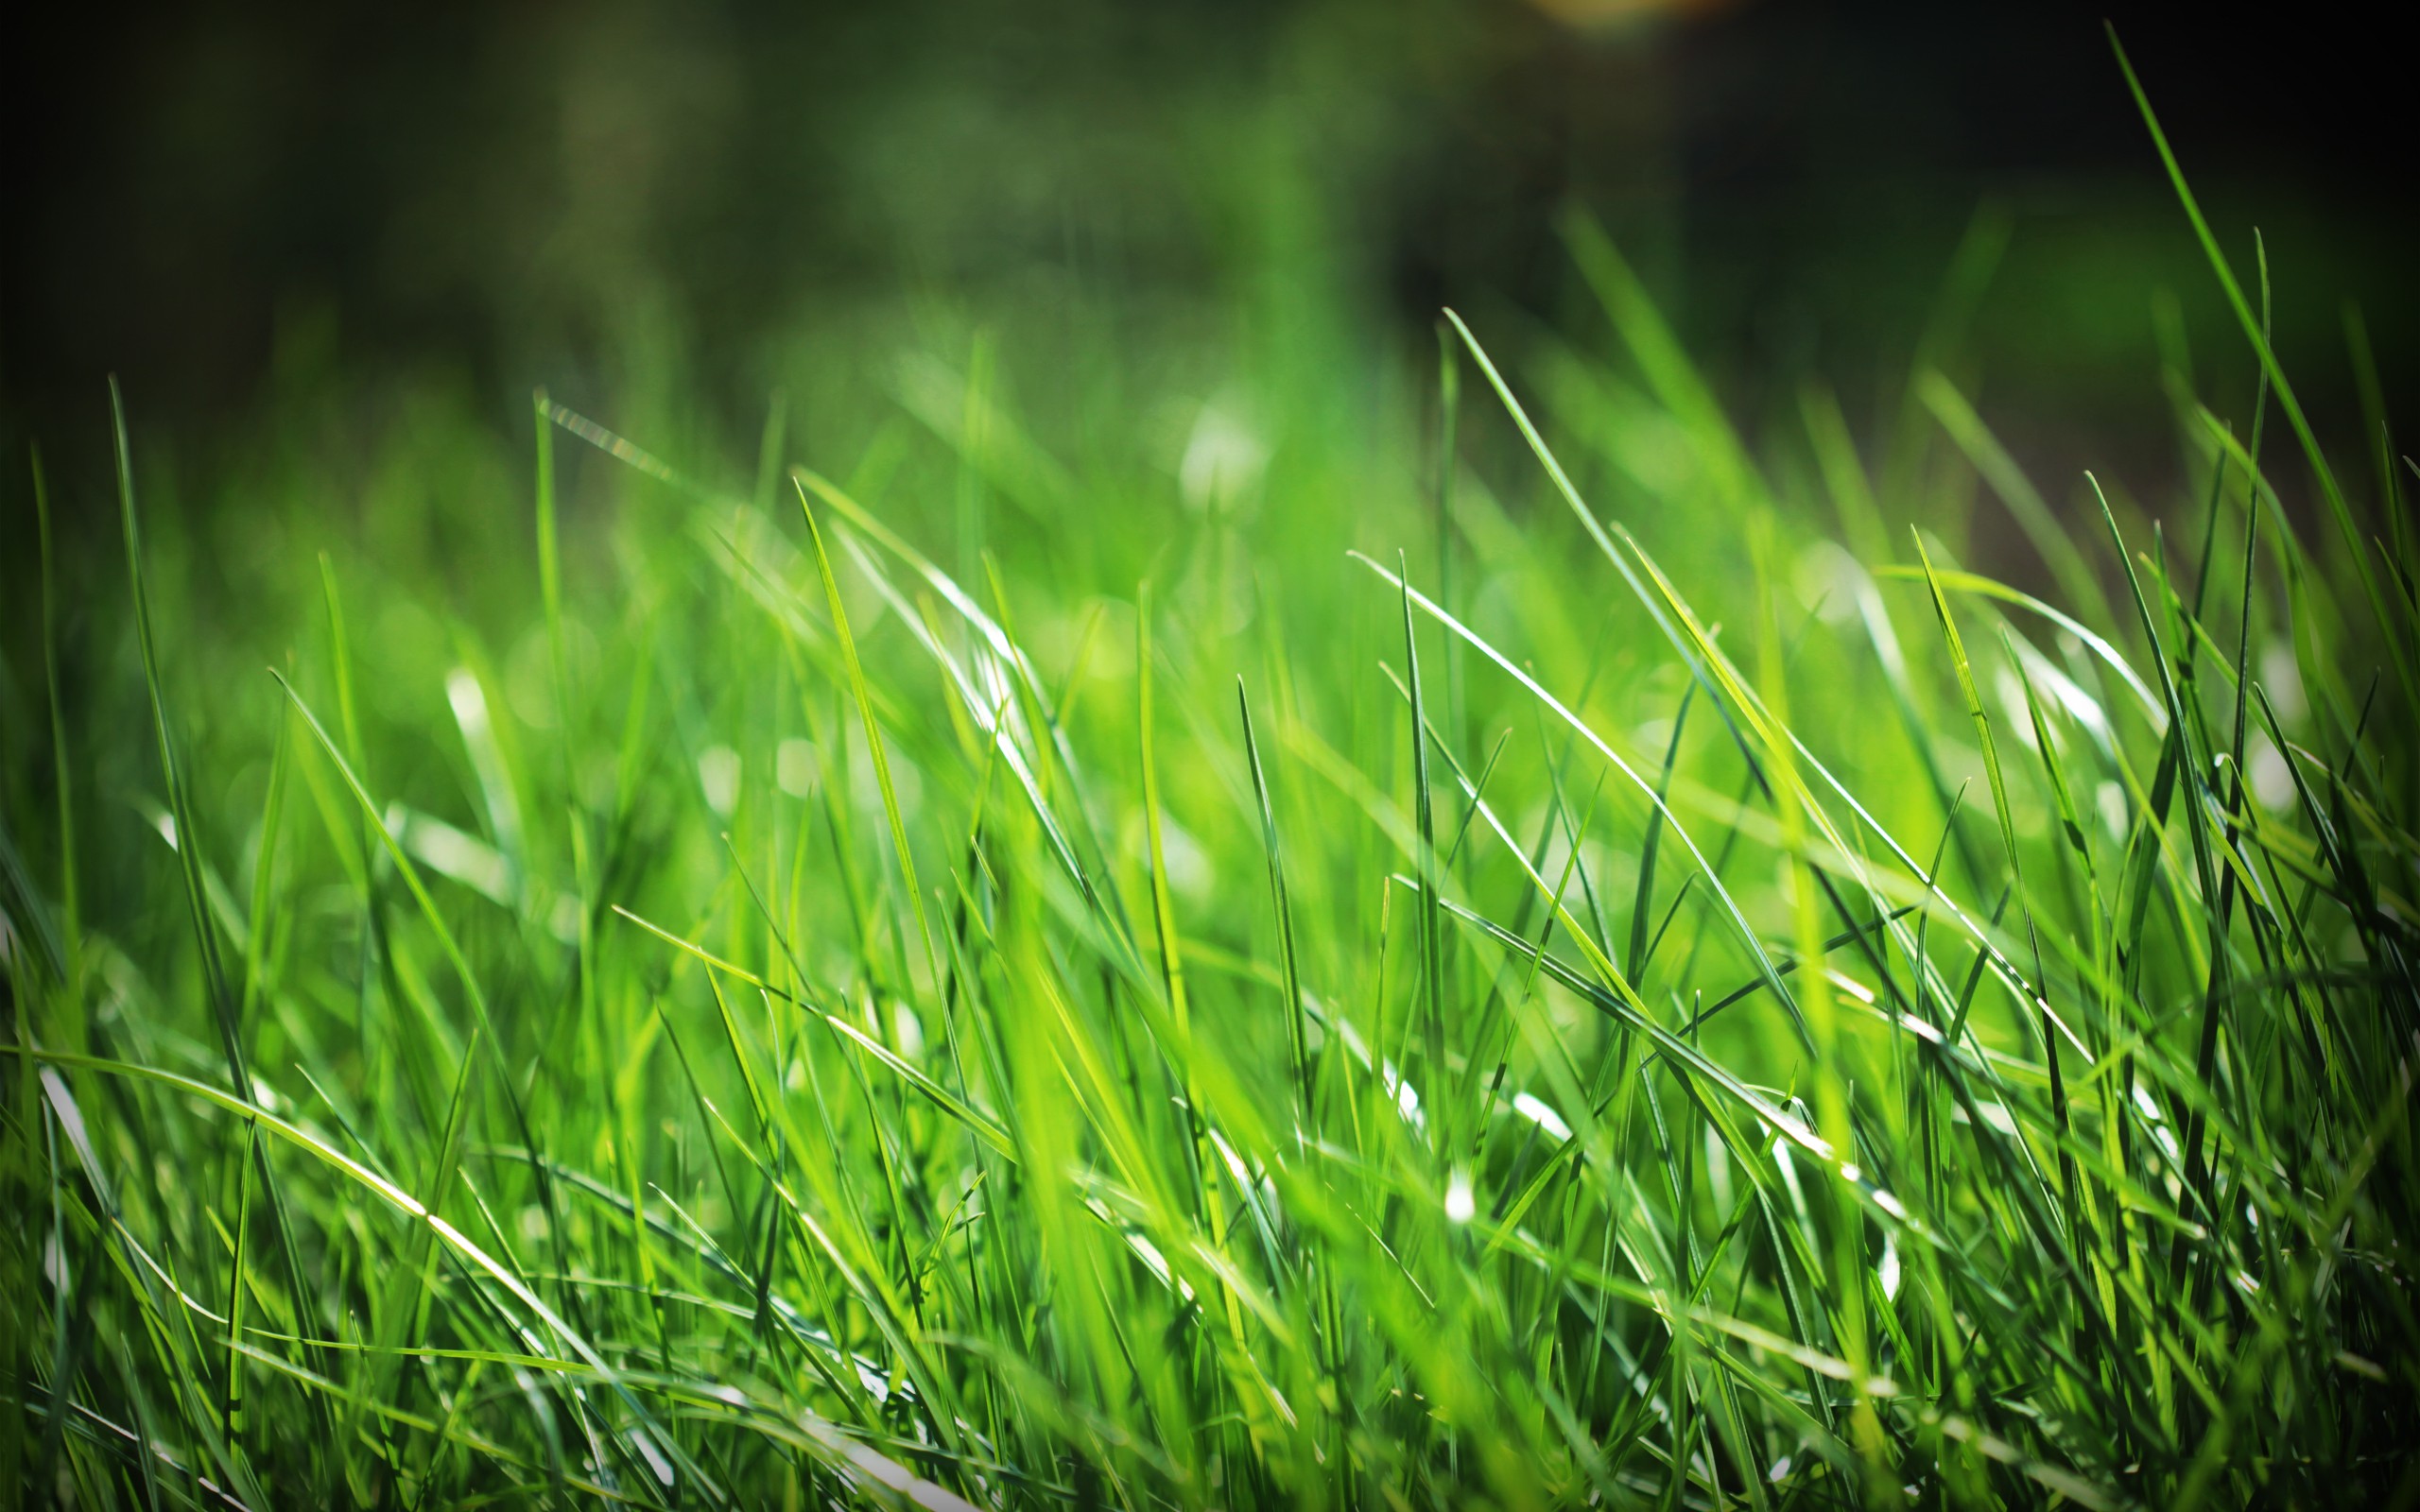 green-grass-hd-wallpapers-free-download-nature-images | KG Paisaje